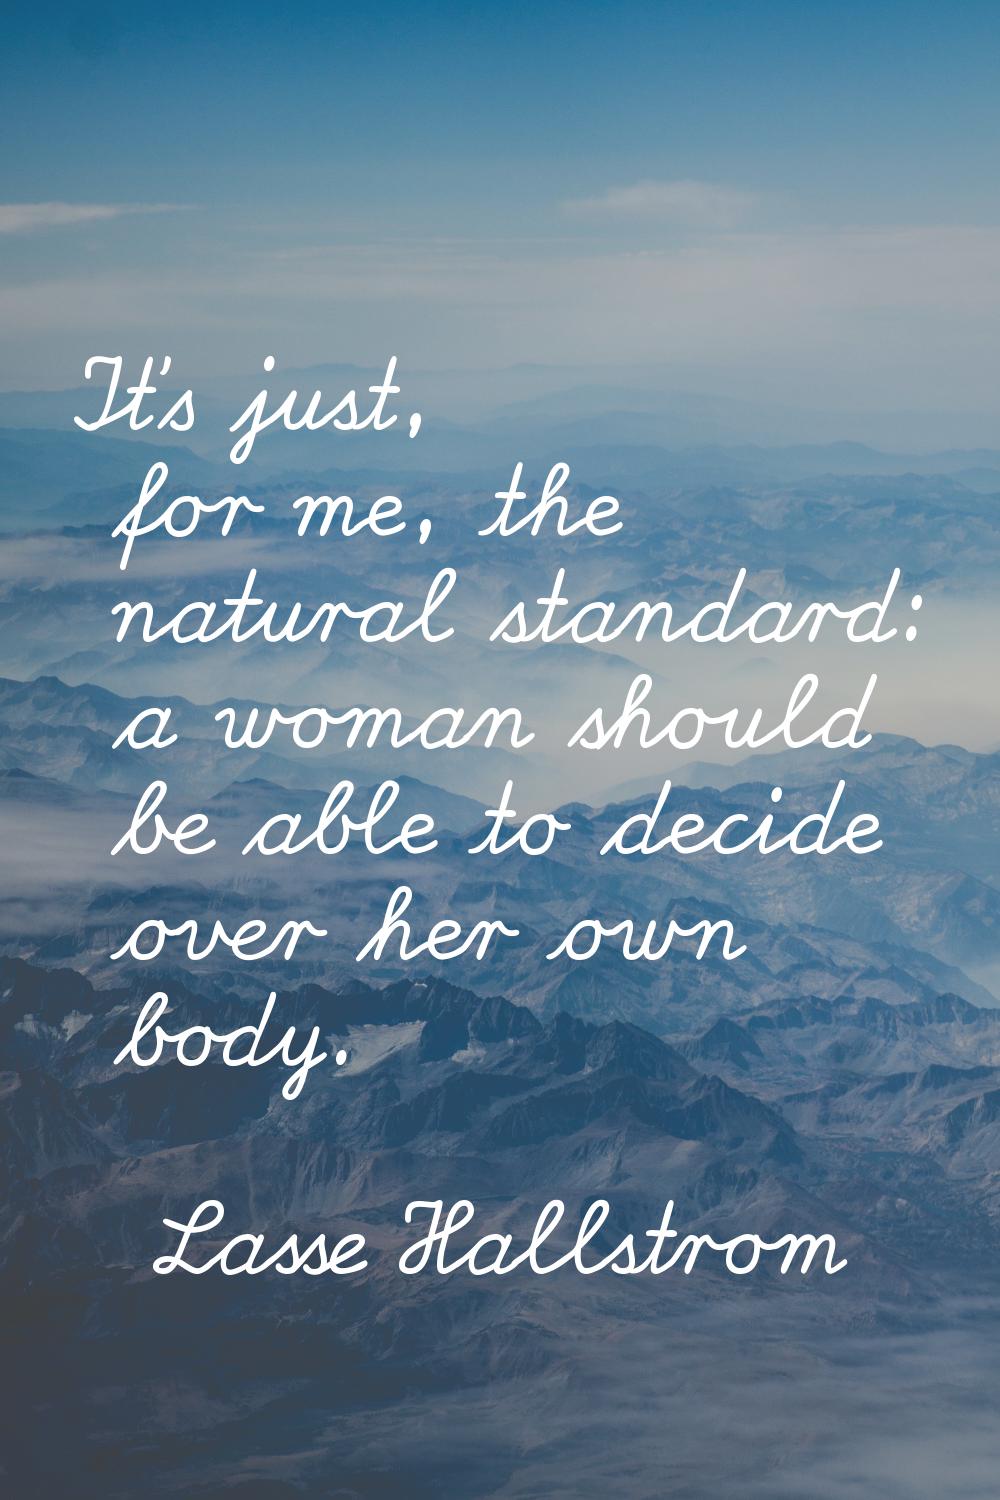 It's just, for me, the natural standard: a woman should be able to decide over her own body.